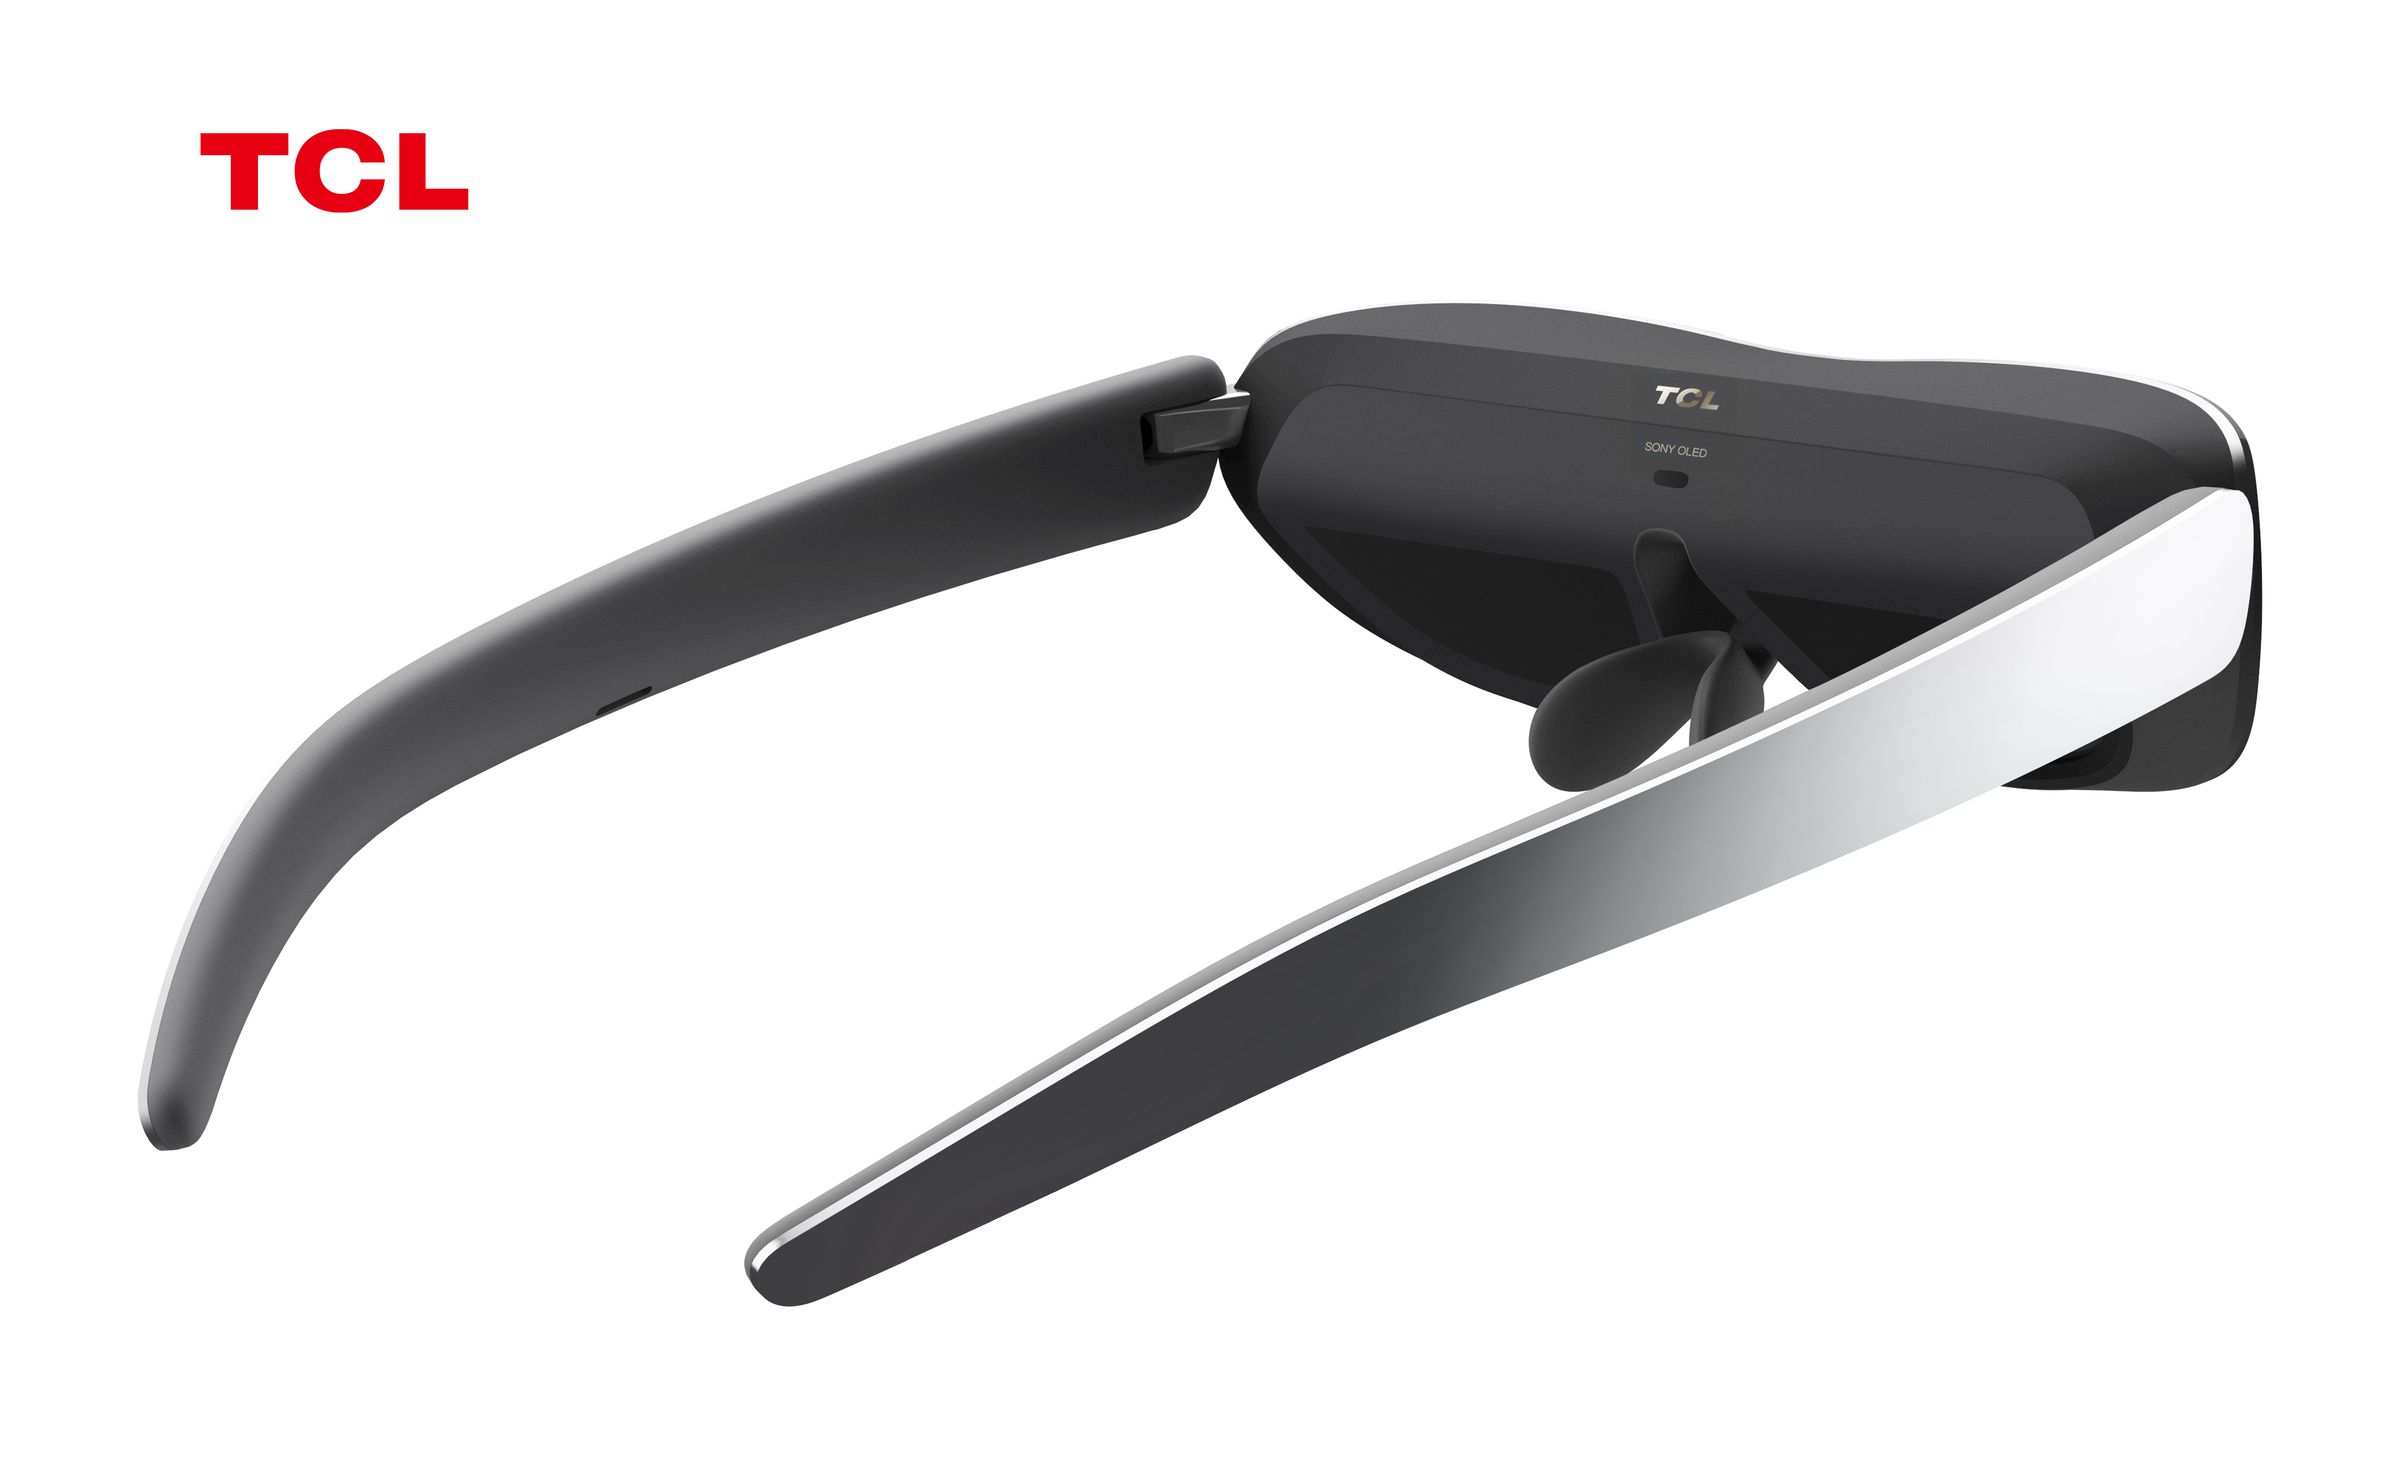 The Wearable Display is shaped like a pair of standard glasses.